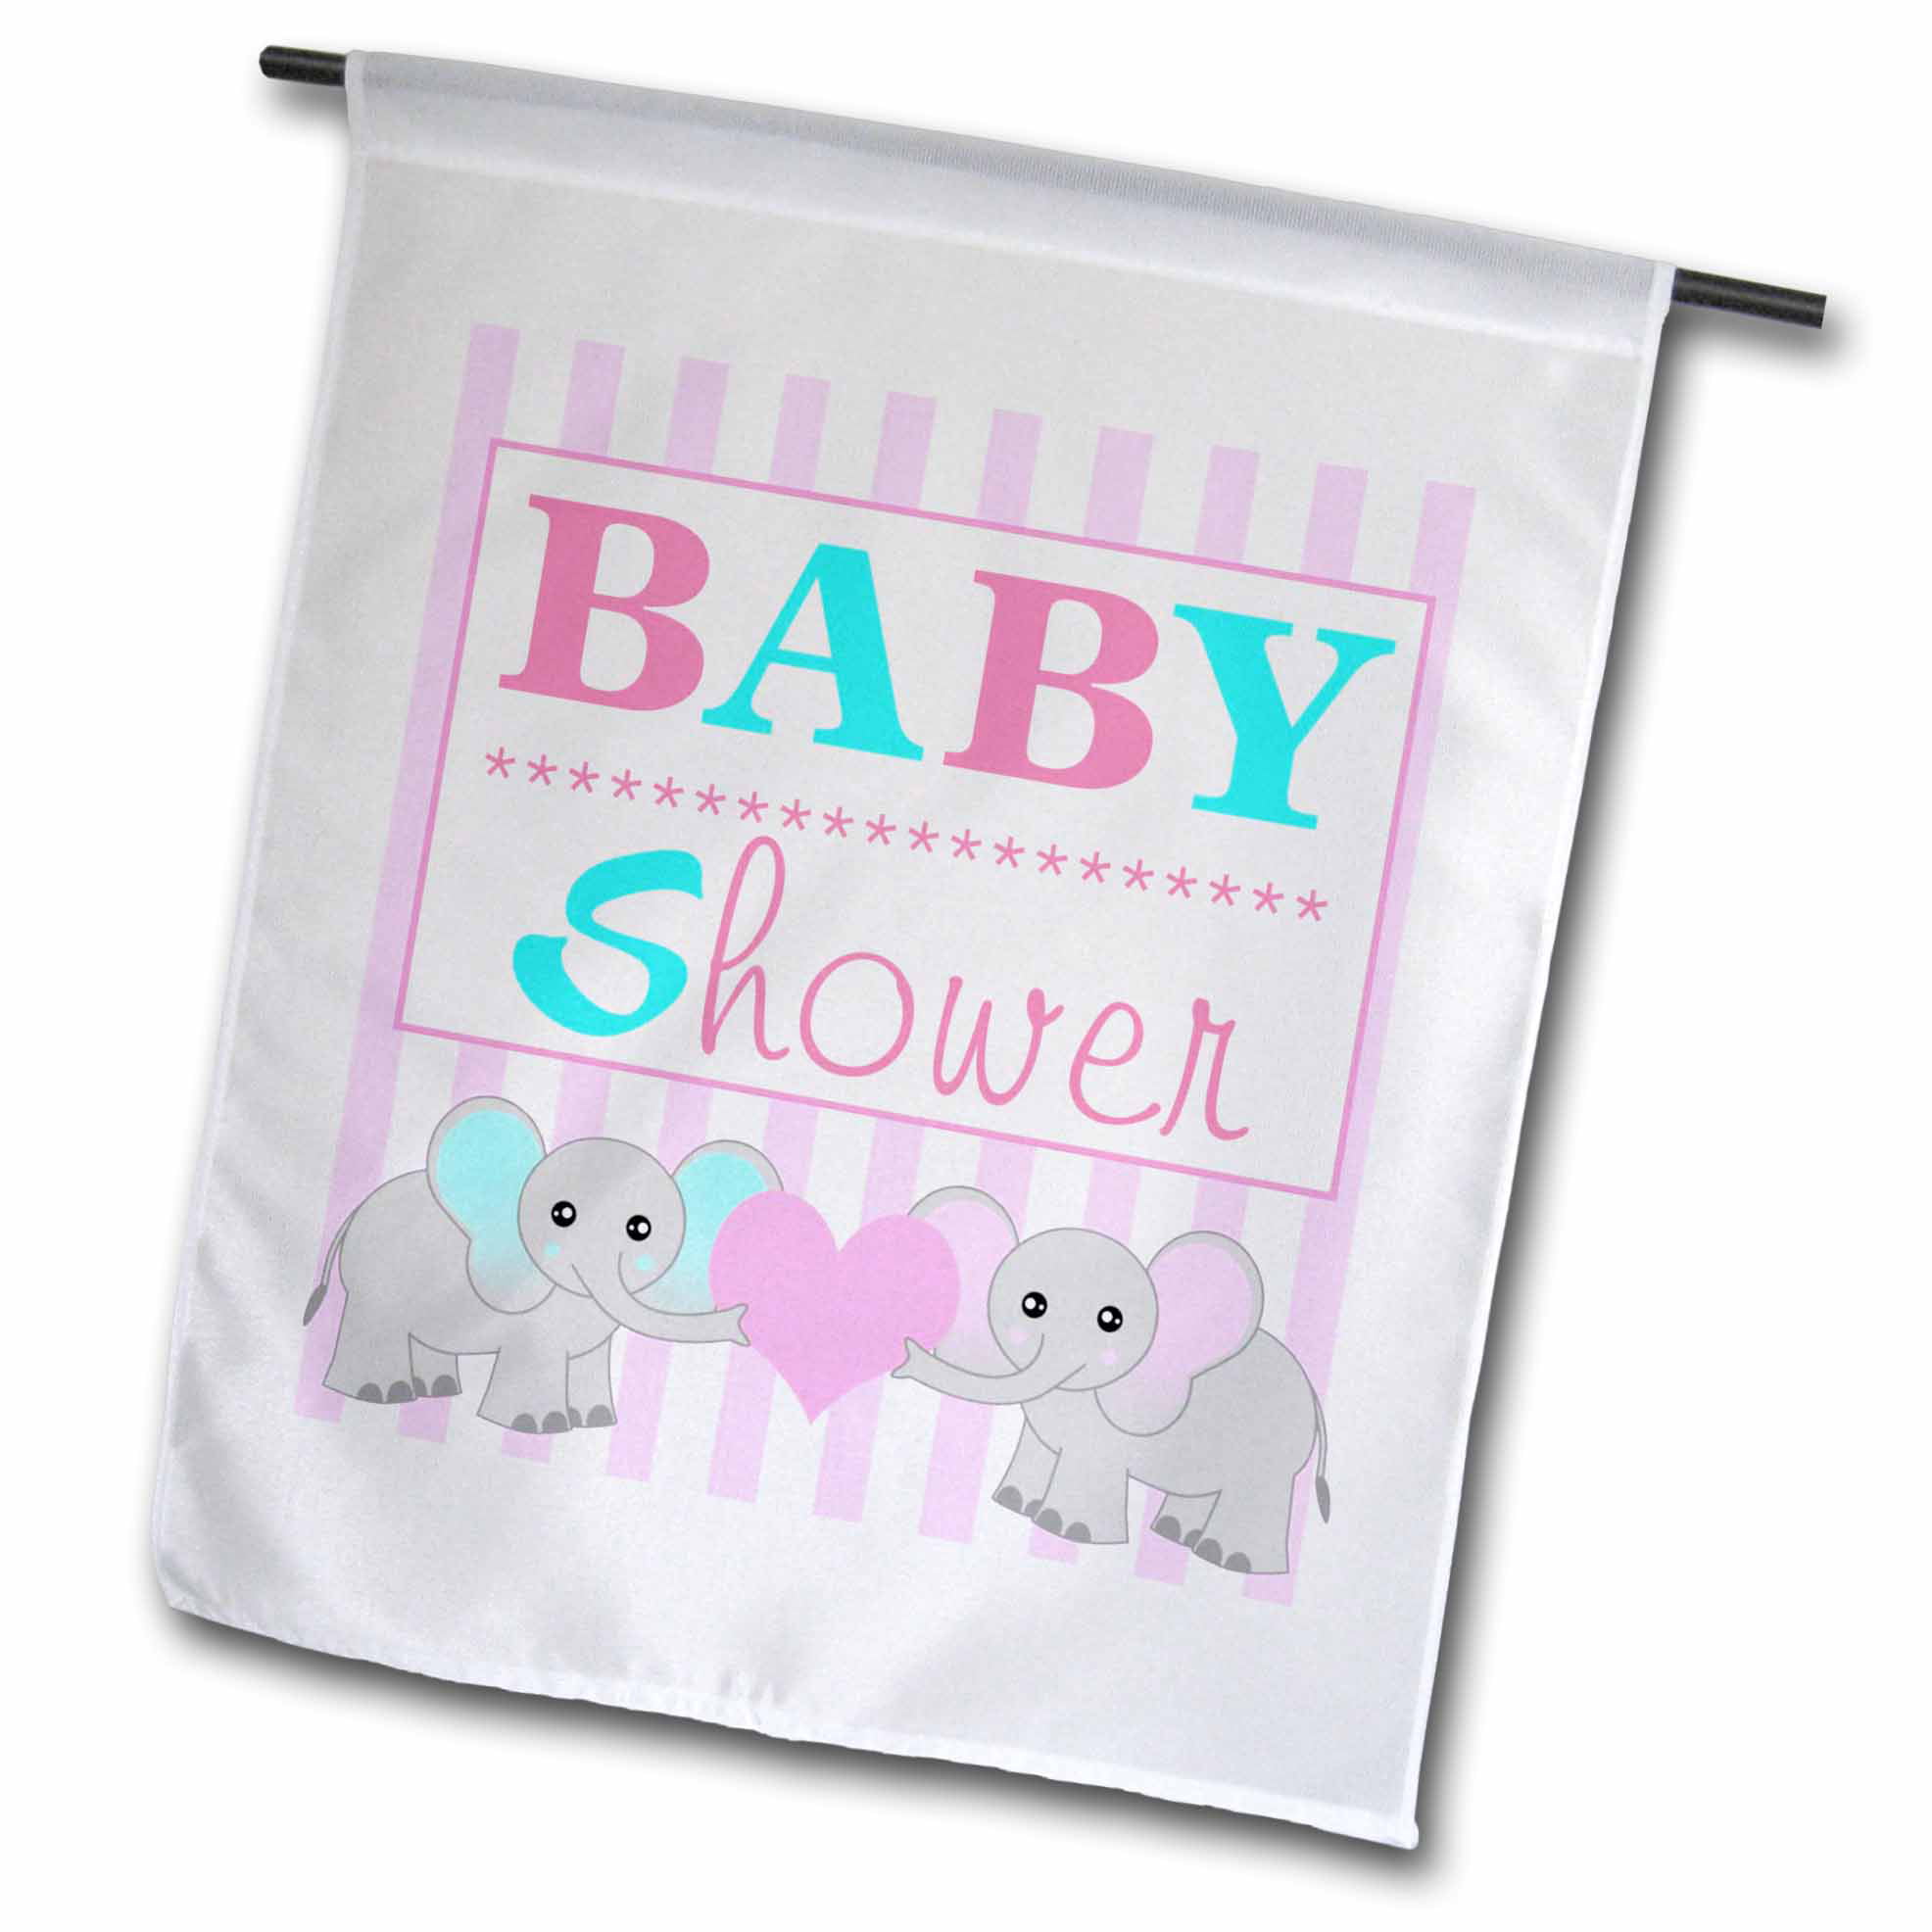 3dRose fl_57085_1 Baby Shower Cute Twin Elephants Pink and Blue Garden Flag 12 by 18-Inch 